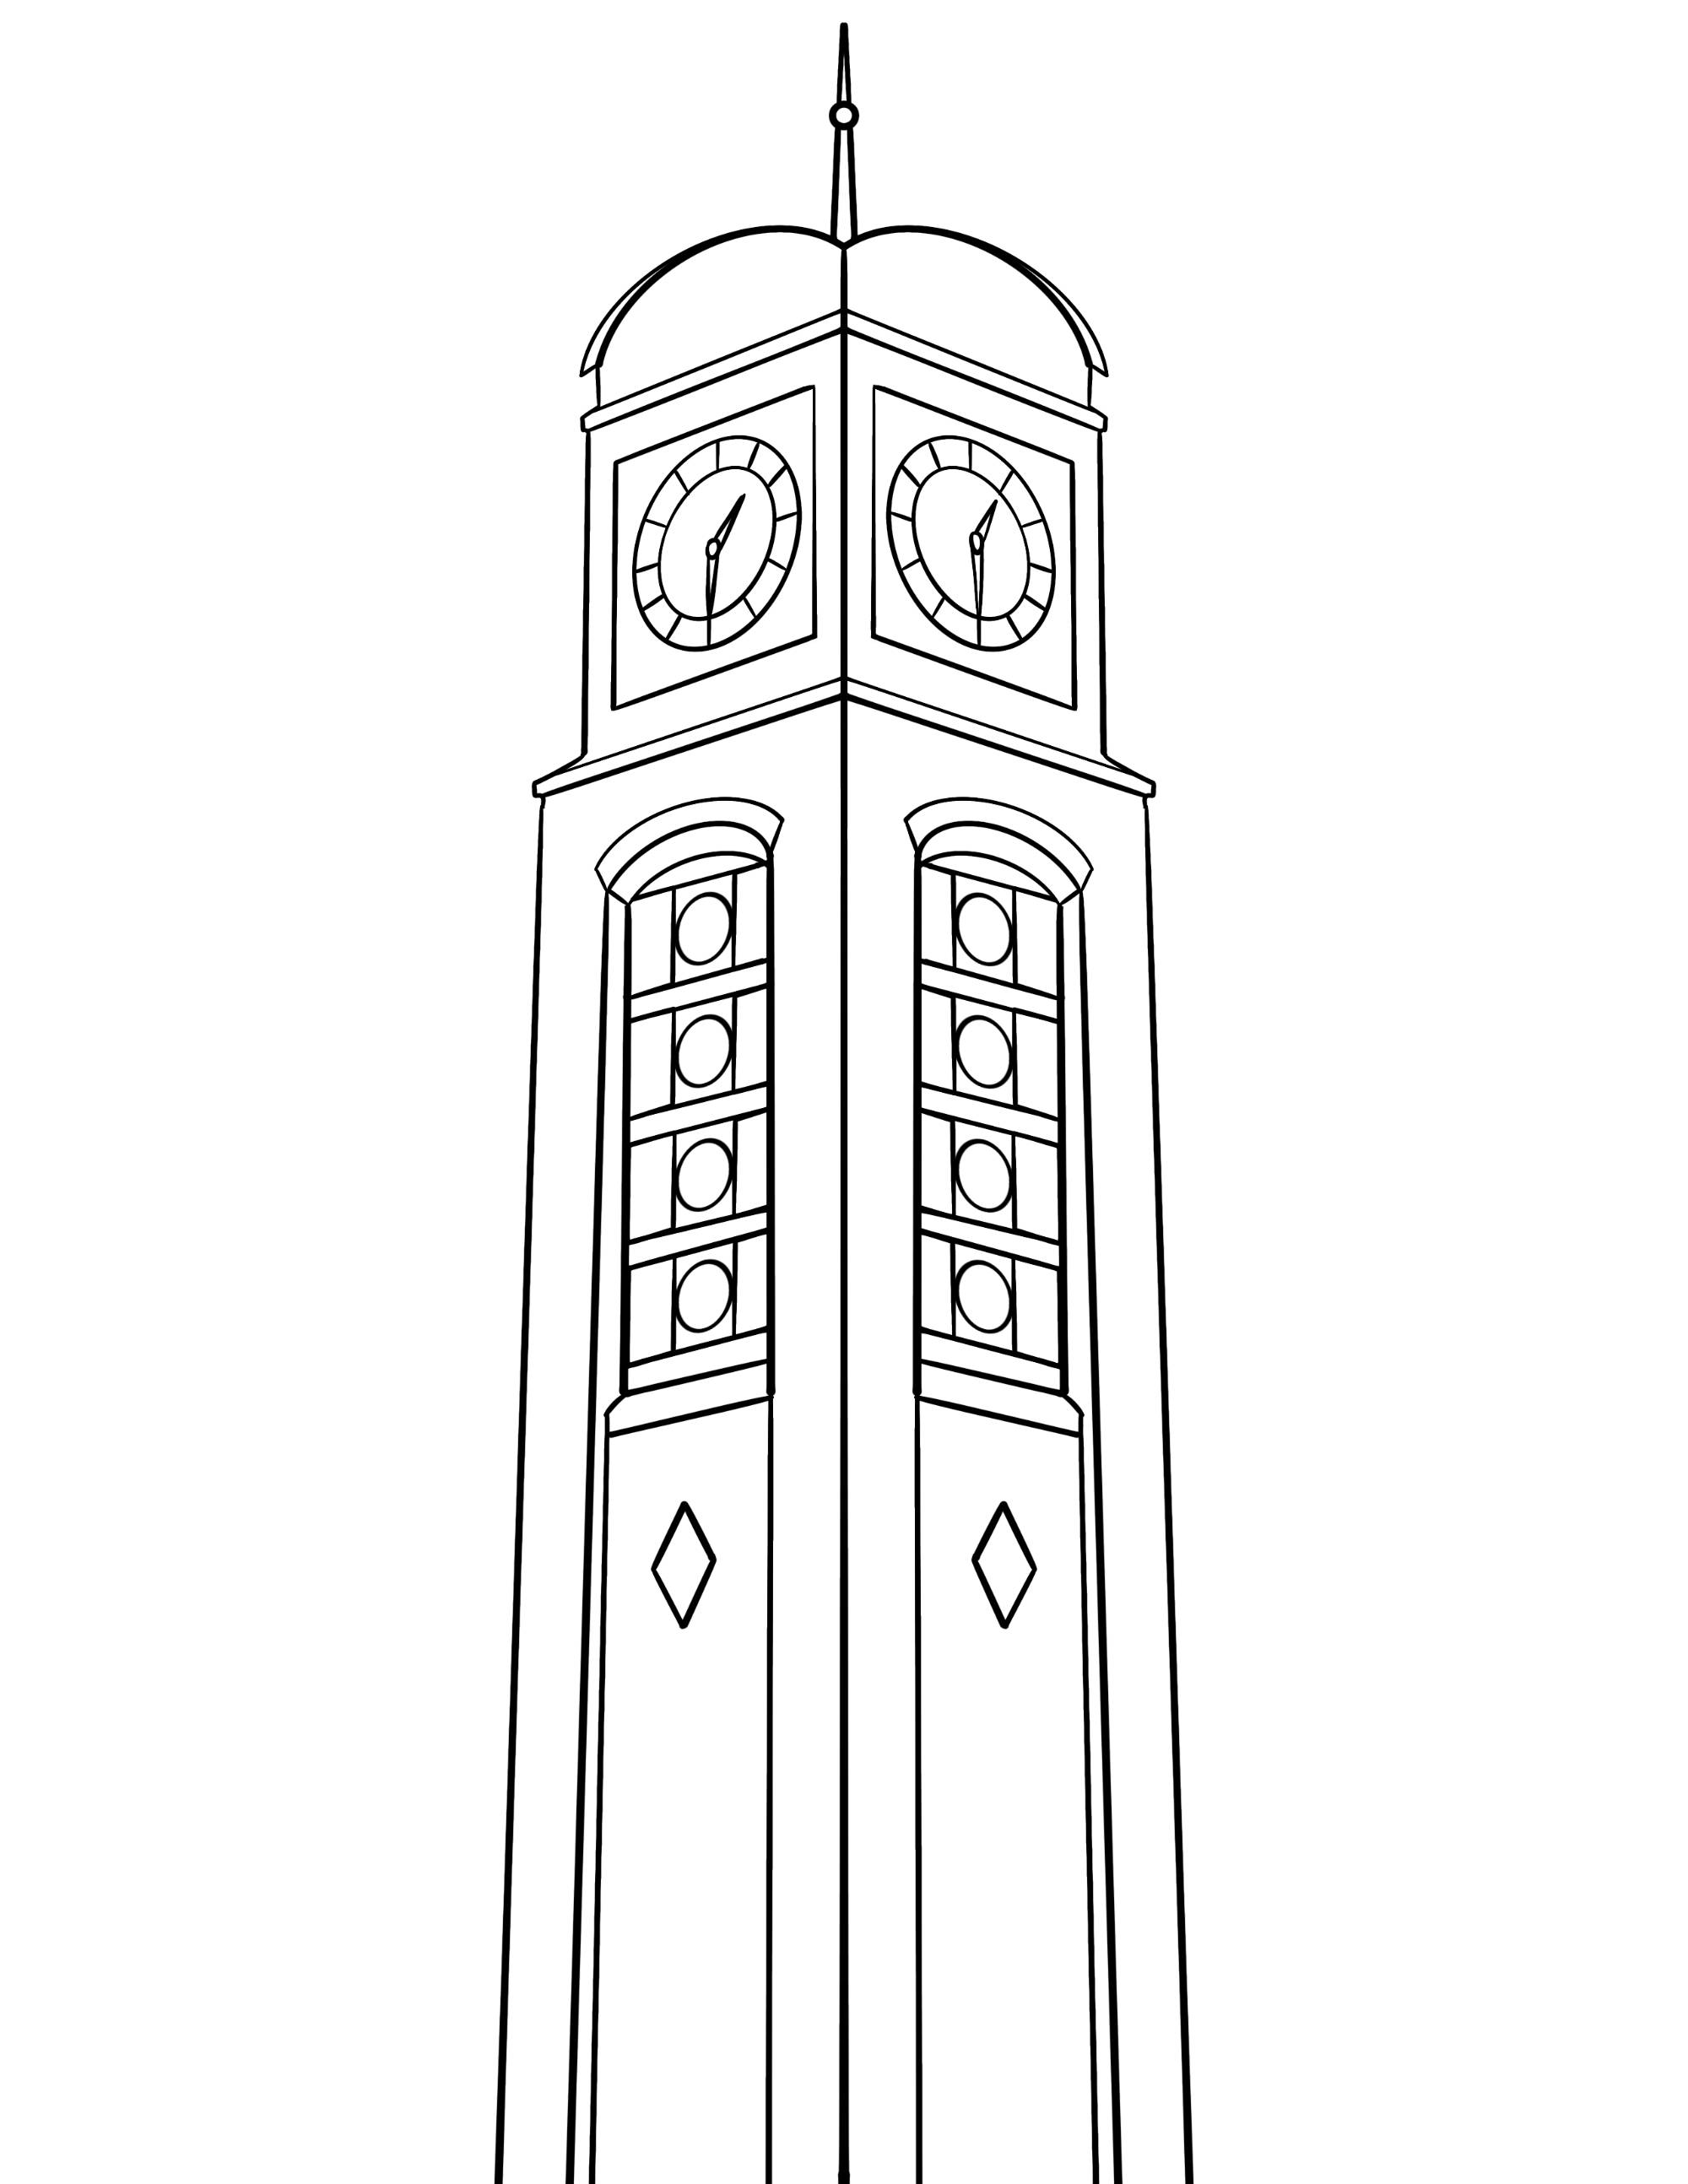 A coloring sheet of the Cook Carillon Tower